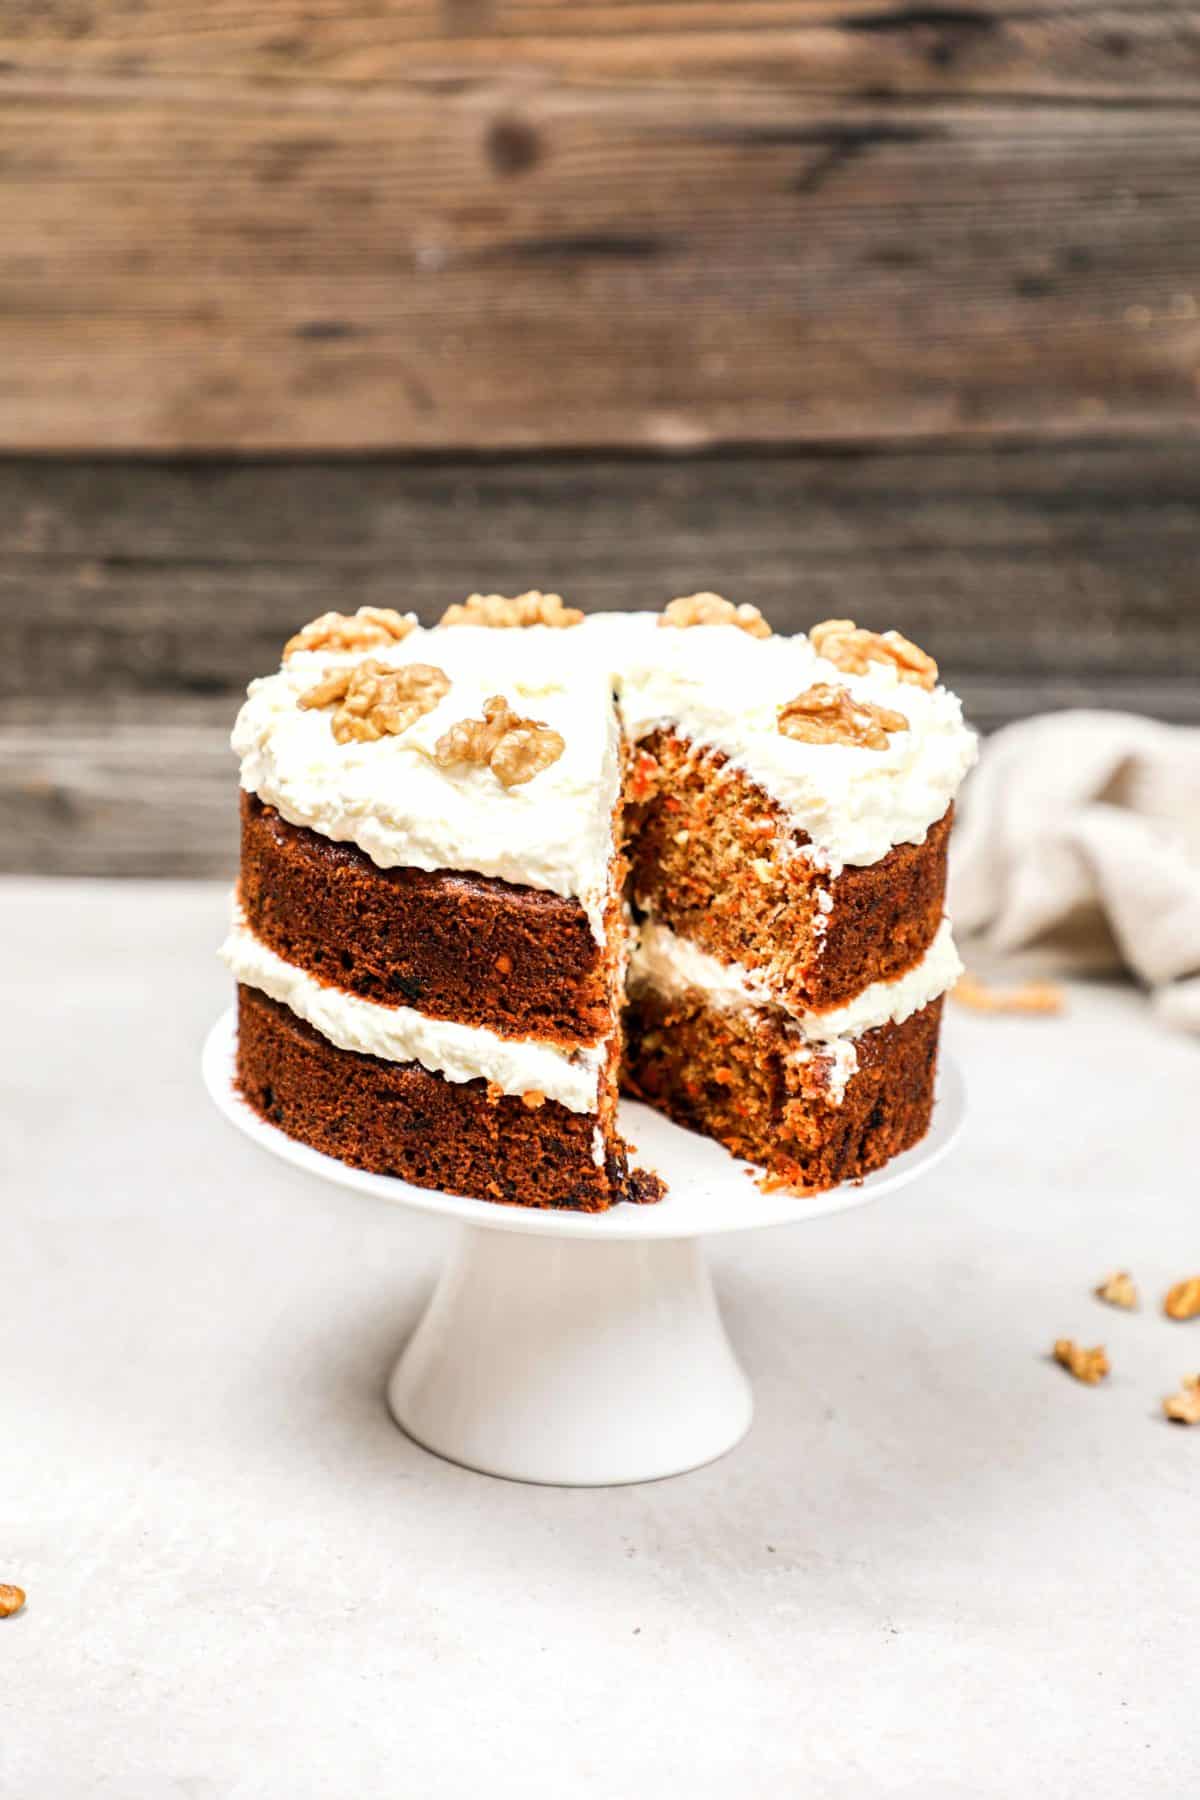 A carrot cake on a cake stand with a slice cut out of it.